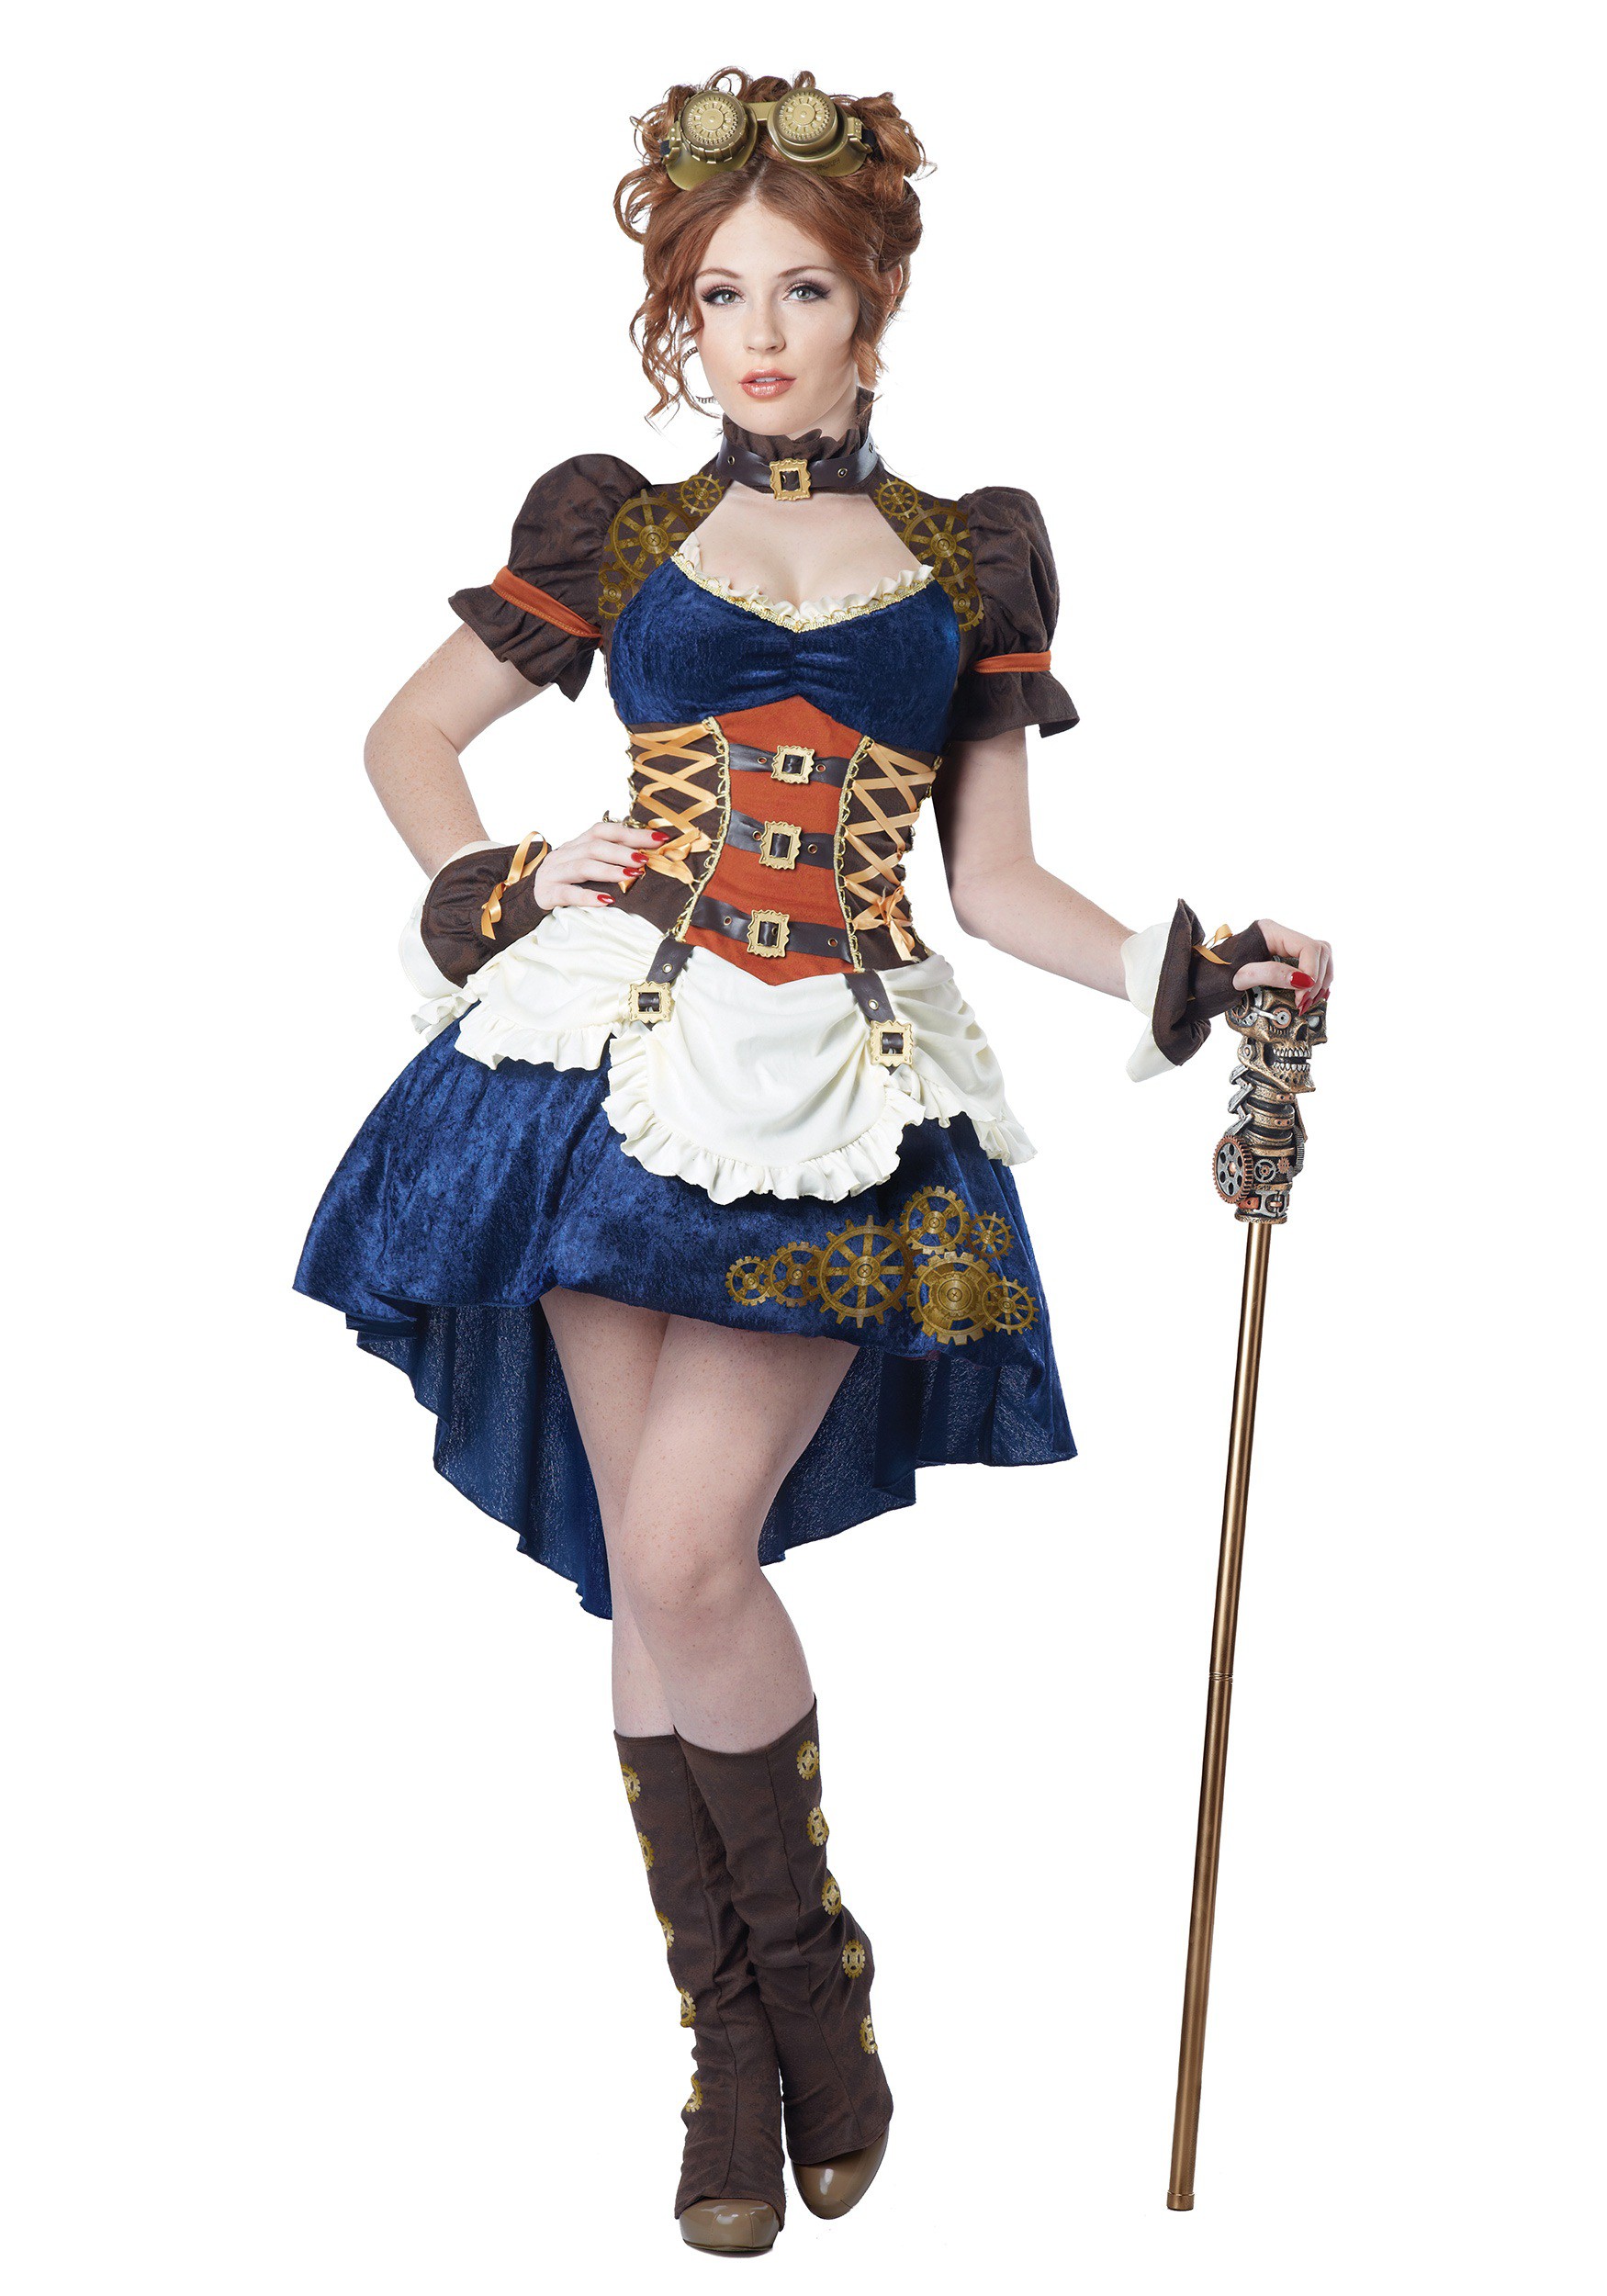 https://images.halloweencostumes.ca/products/30350/1-1/womens-steampunk-fantasy-costume.jpg